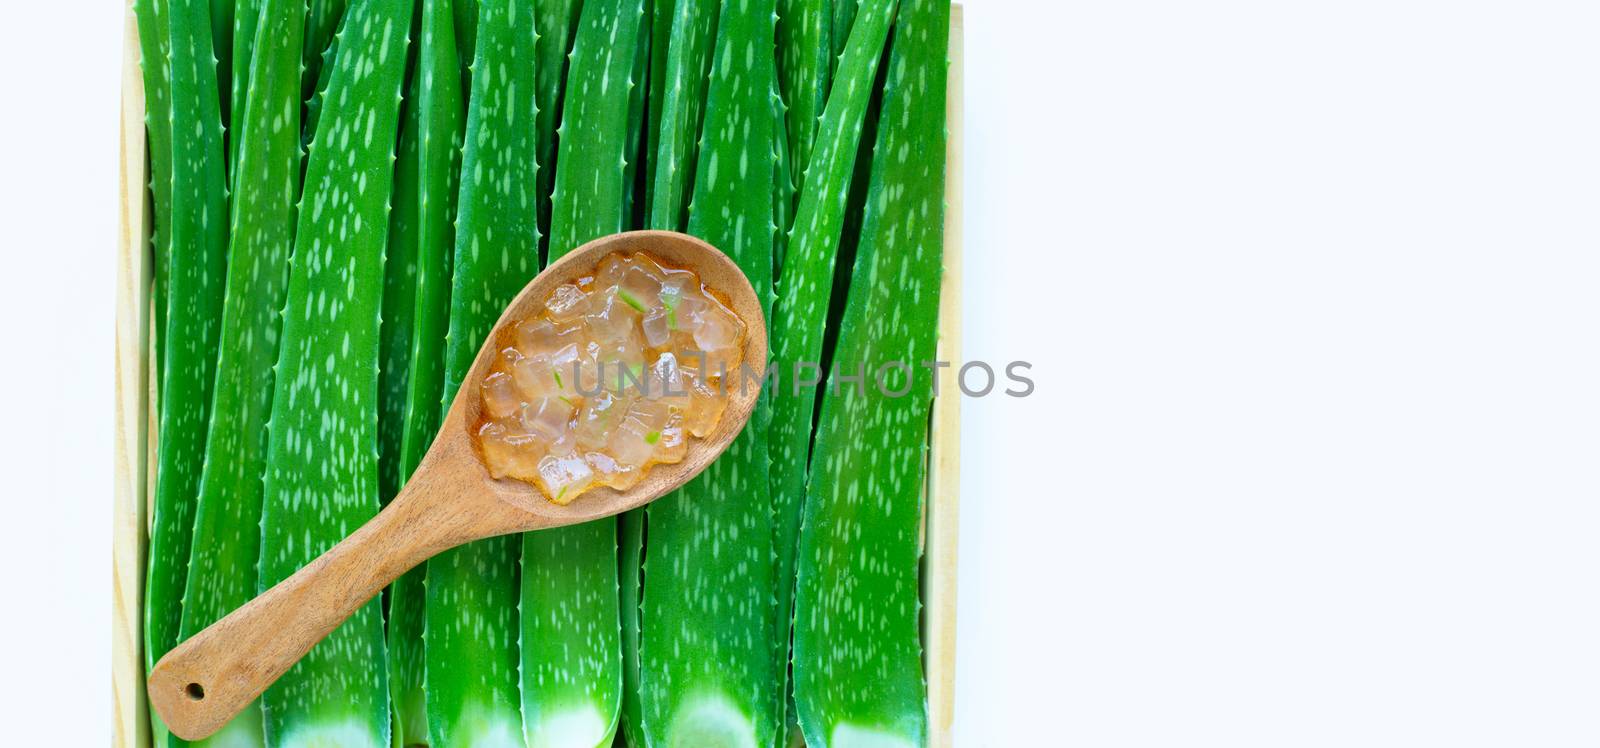 Aloe vera is a popular medicinal plant for health and beauty by Bowonpat